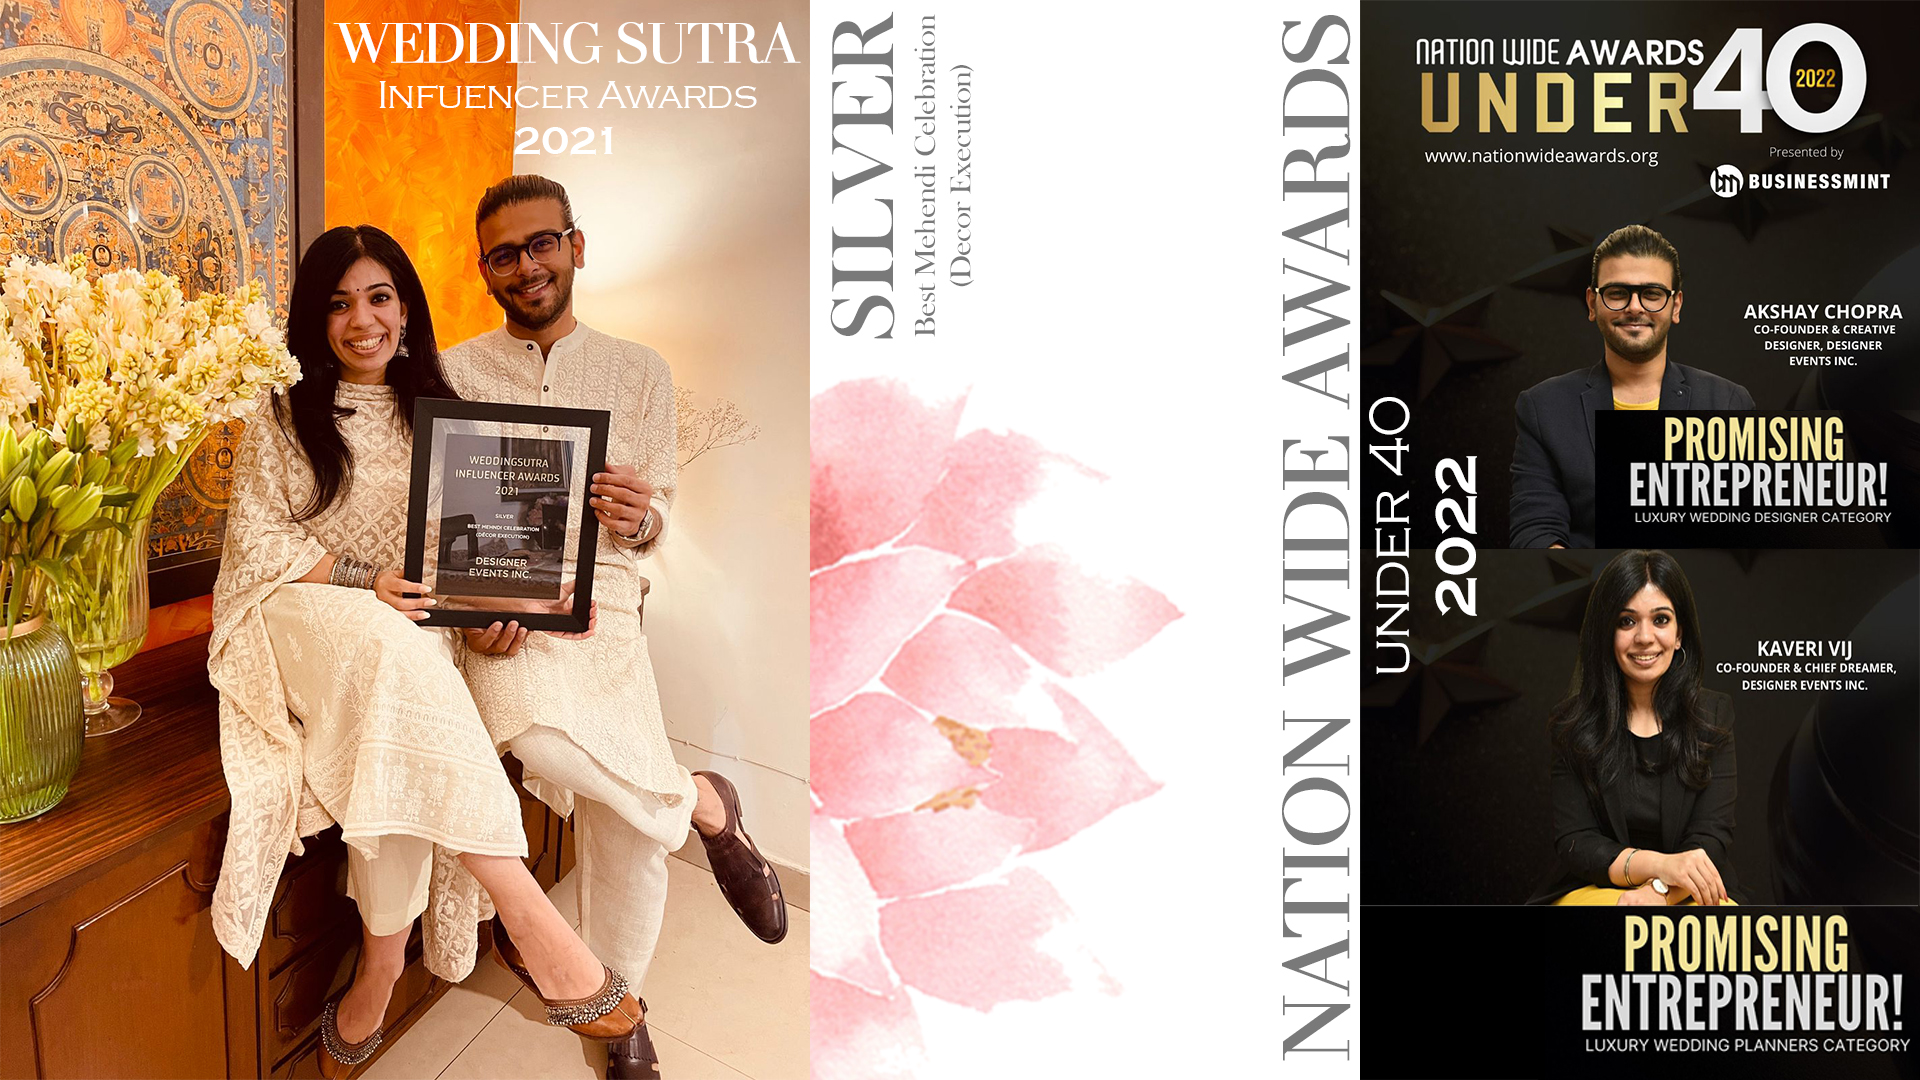 Wedding sutra and nation wide aawards